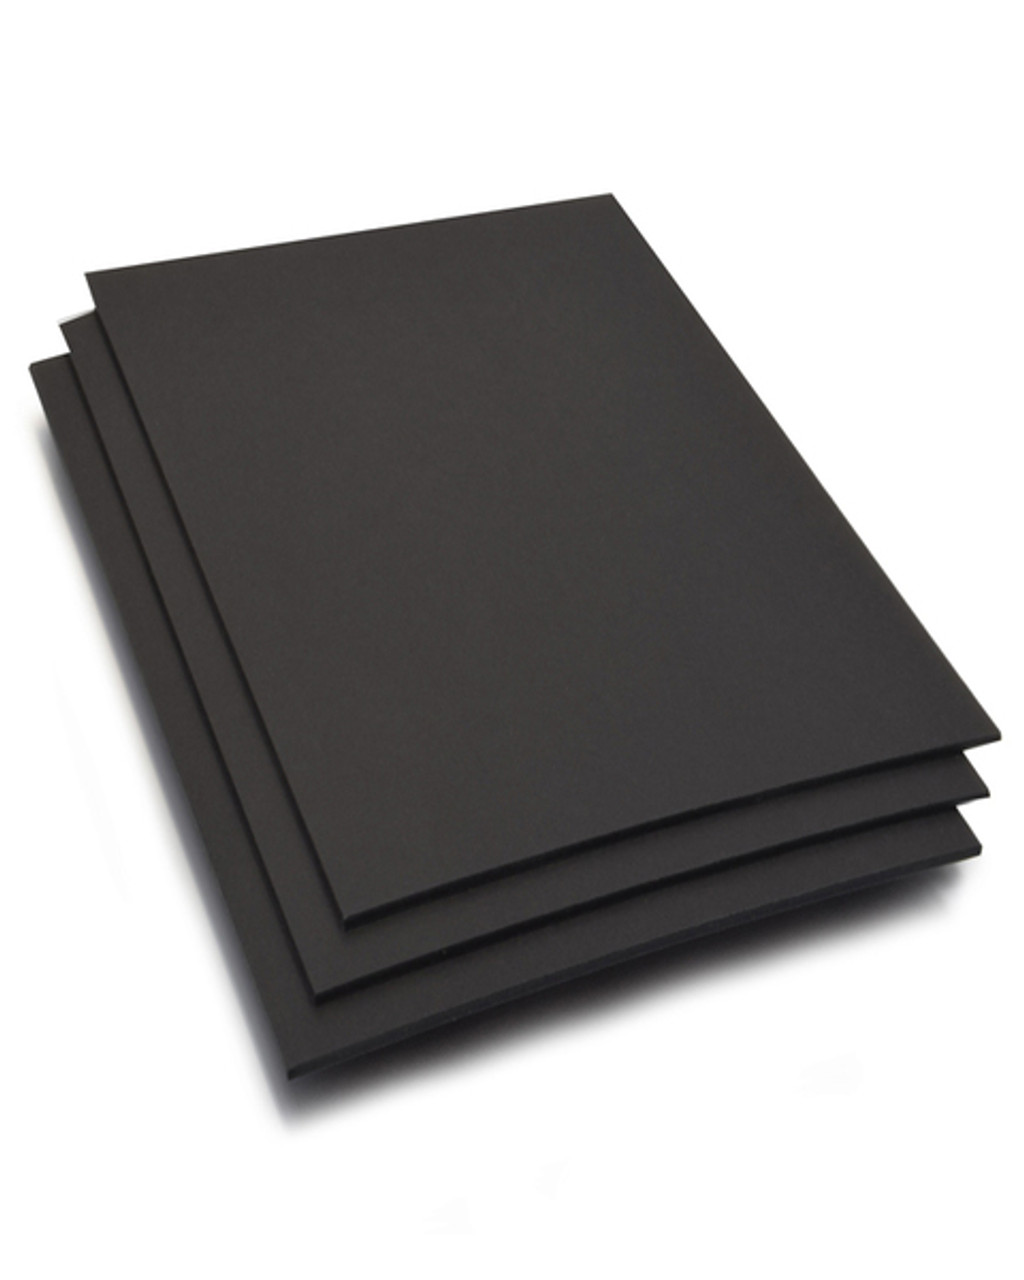 MIVIDE 20 Pack 11x14 inch Black Foam Boards, Foam Core Backing Boards 3/16 inch Thick Double